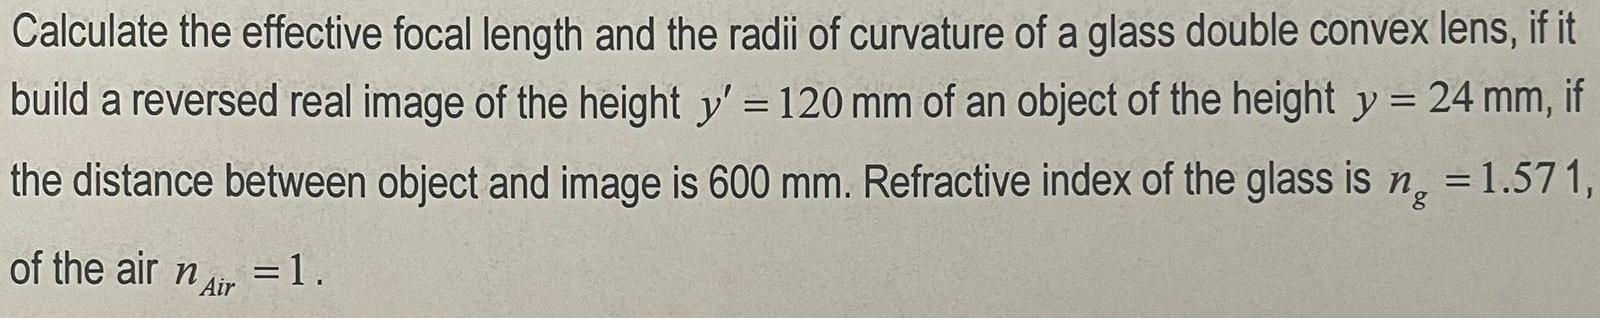 Calculate the effective focal length and the radii of curvature of a glass double convex lens, if it build a